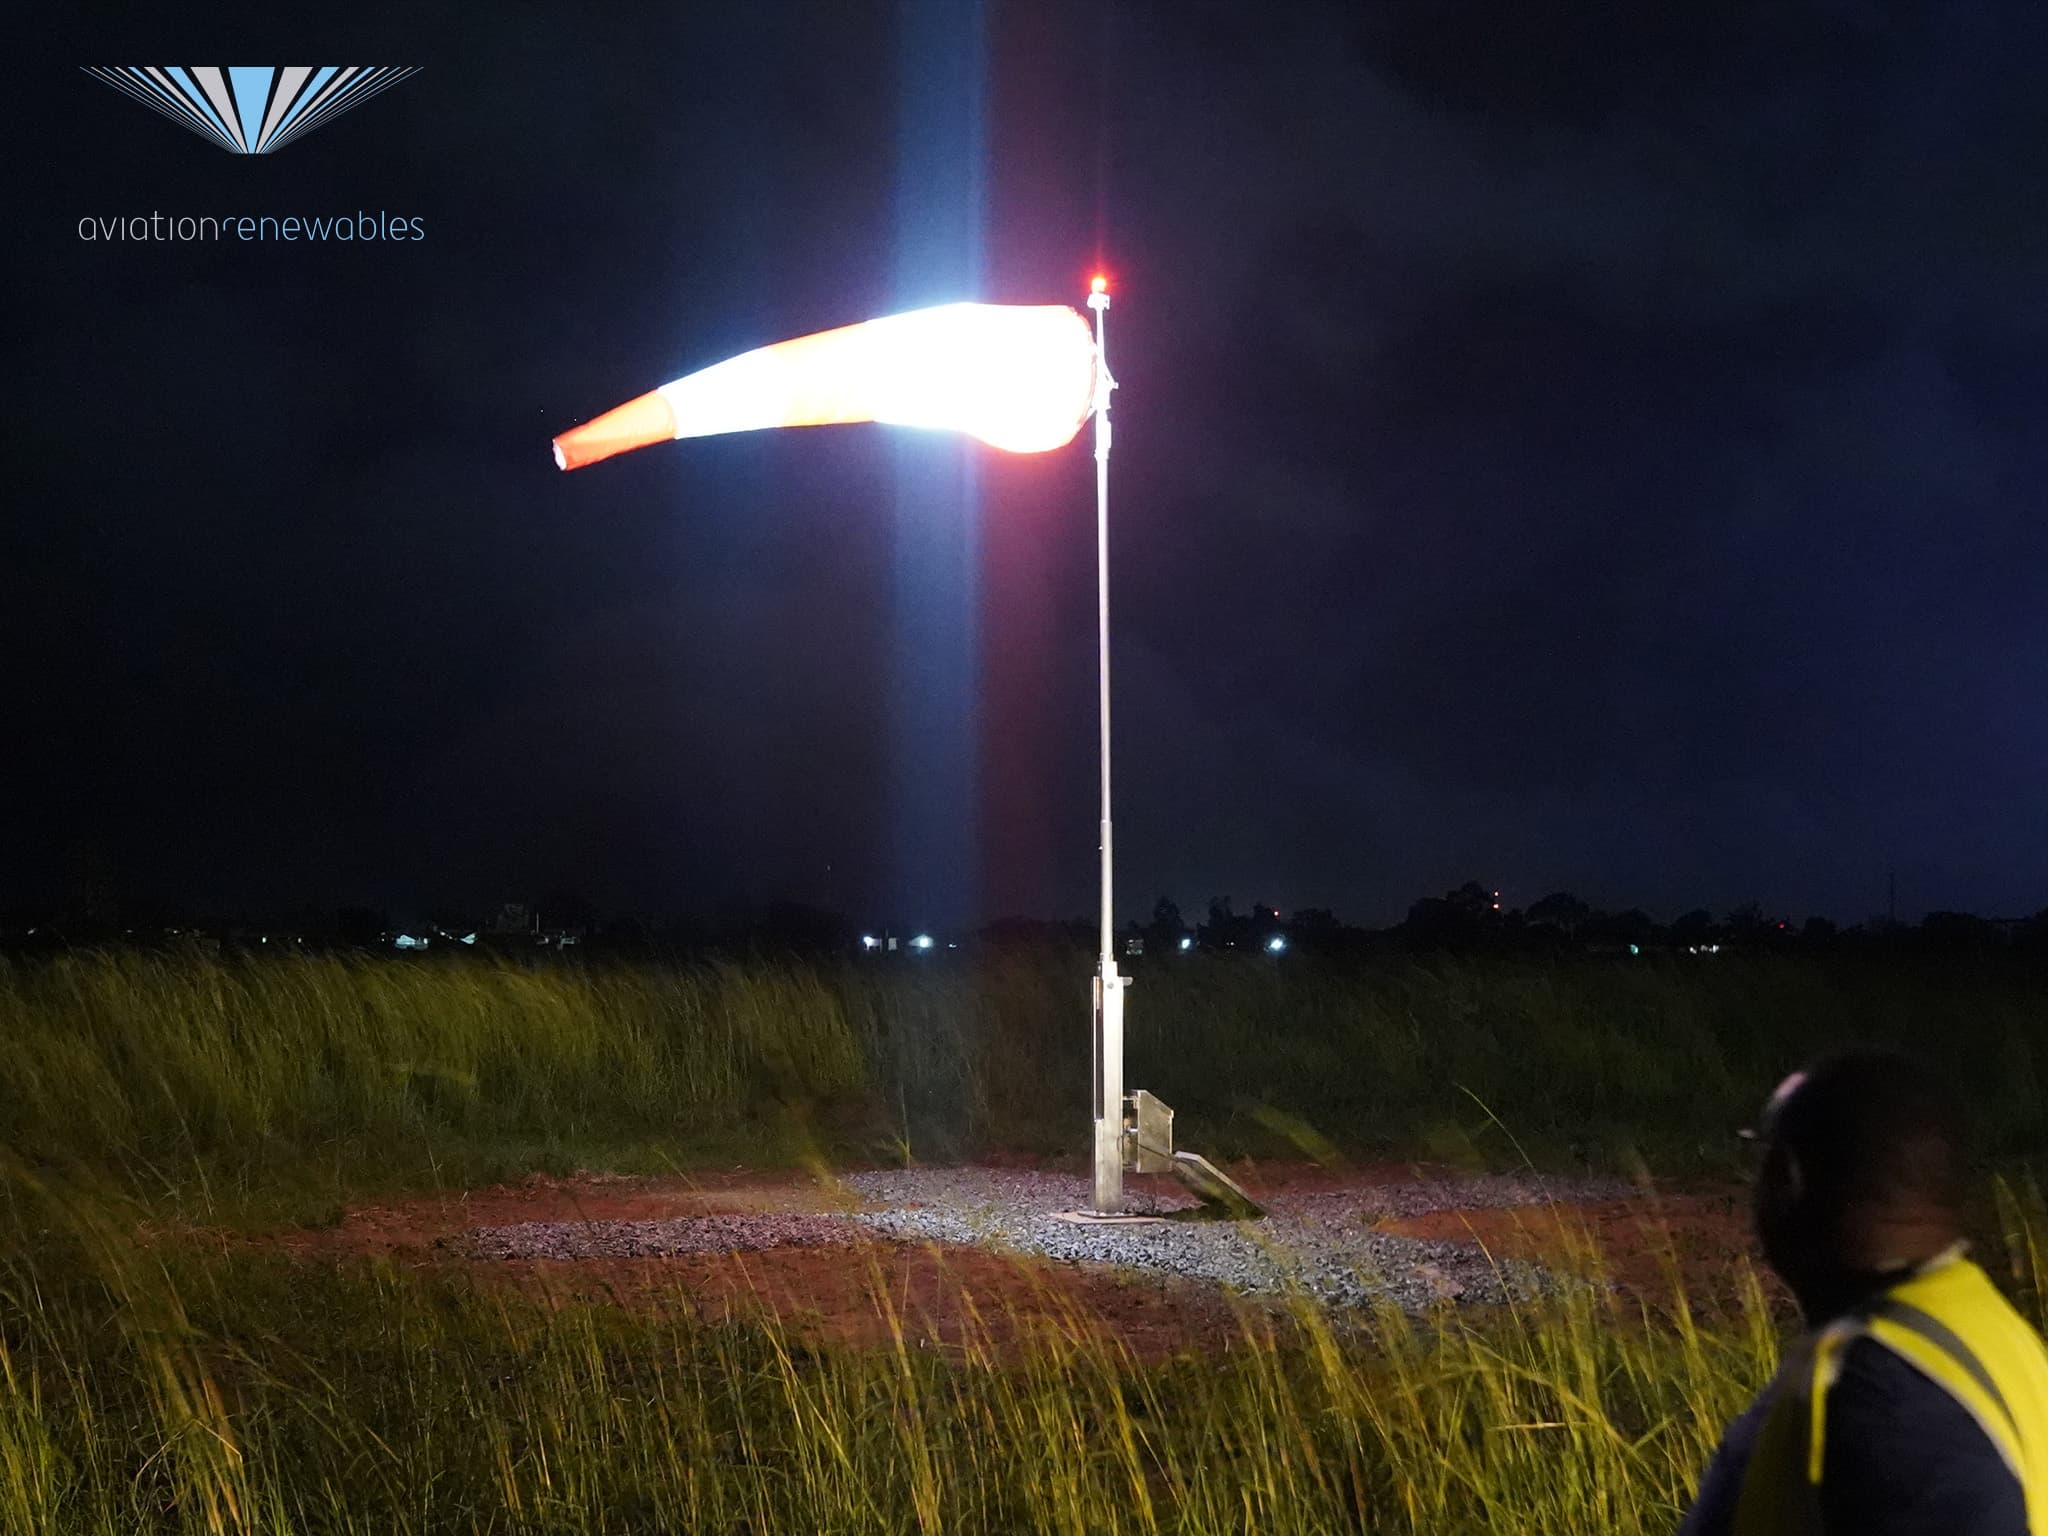 windsock-lighting-solution-commissioned-by-aviation-renewables-wind-cone